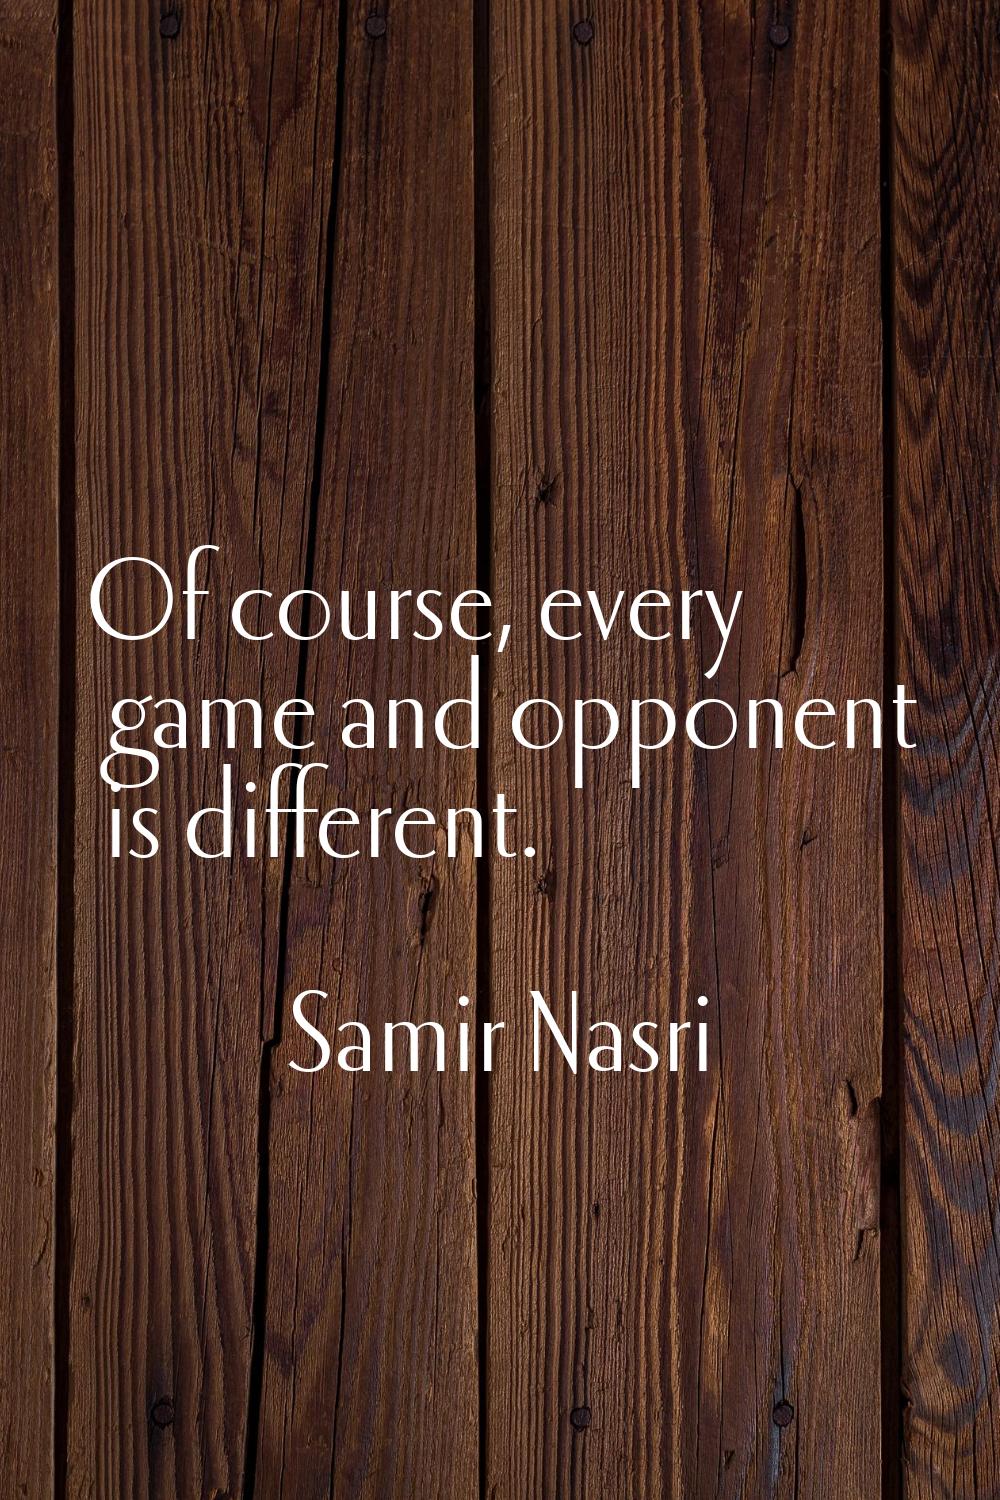 Of course, every game and opponent is different.